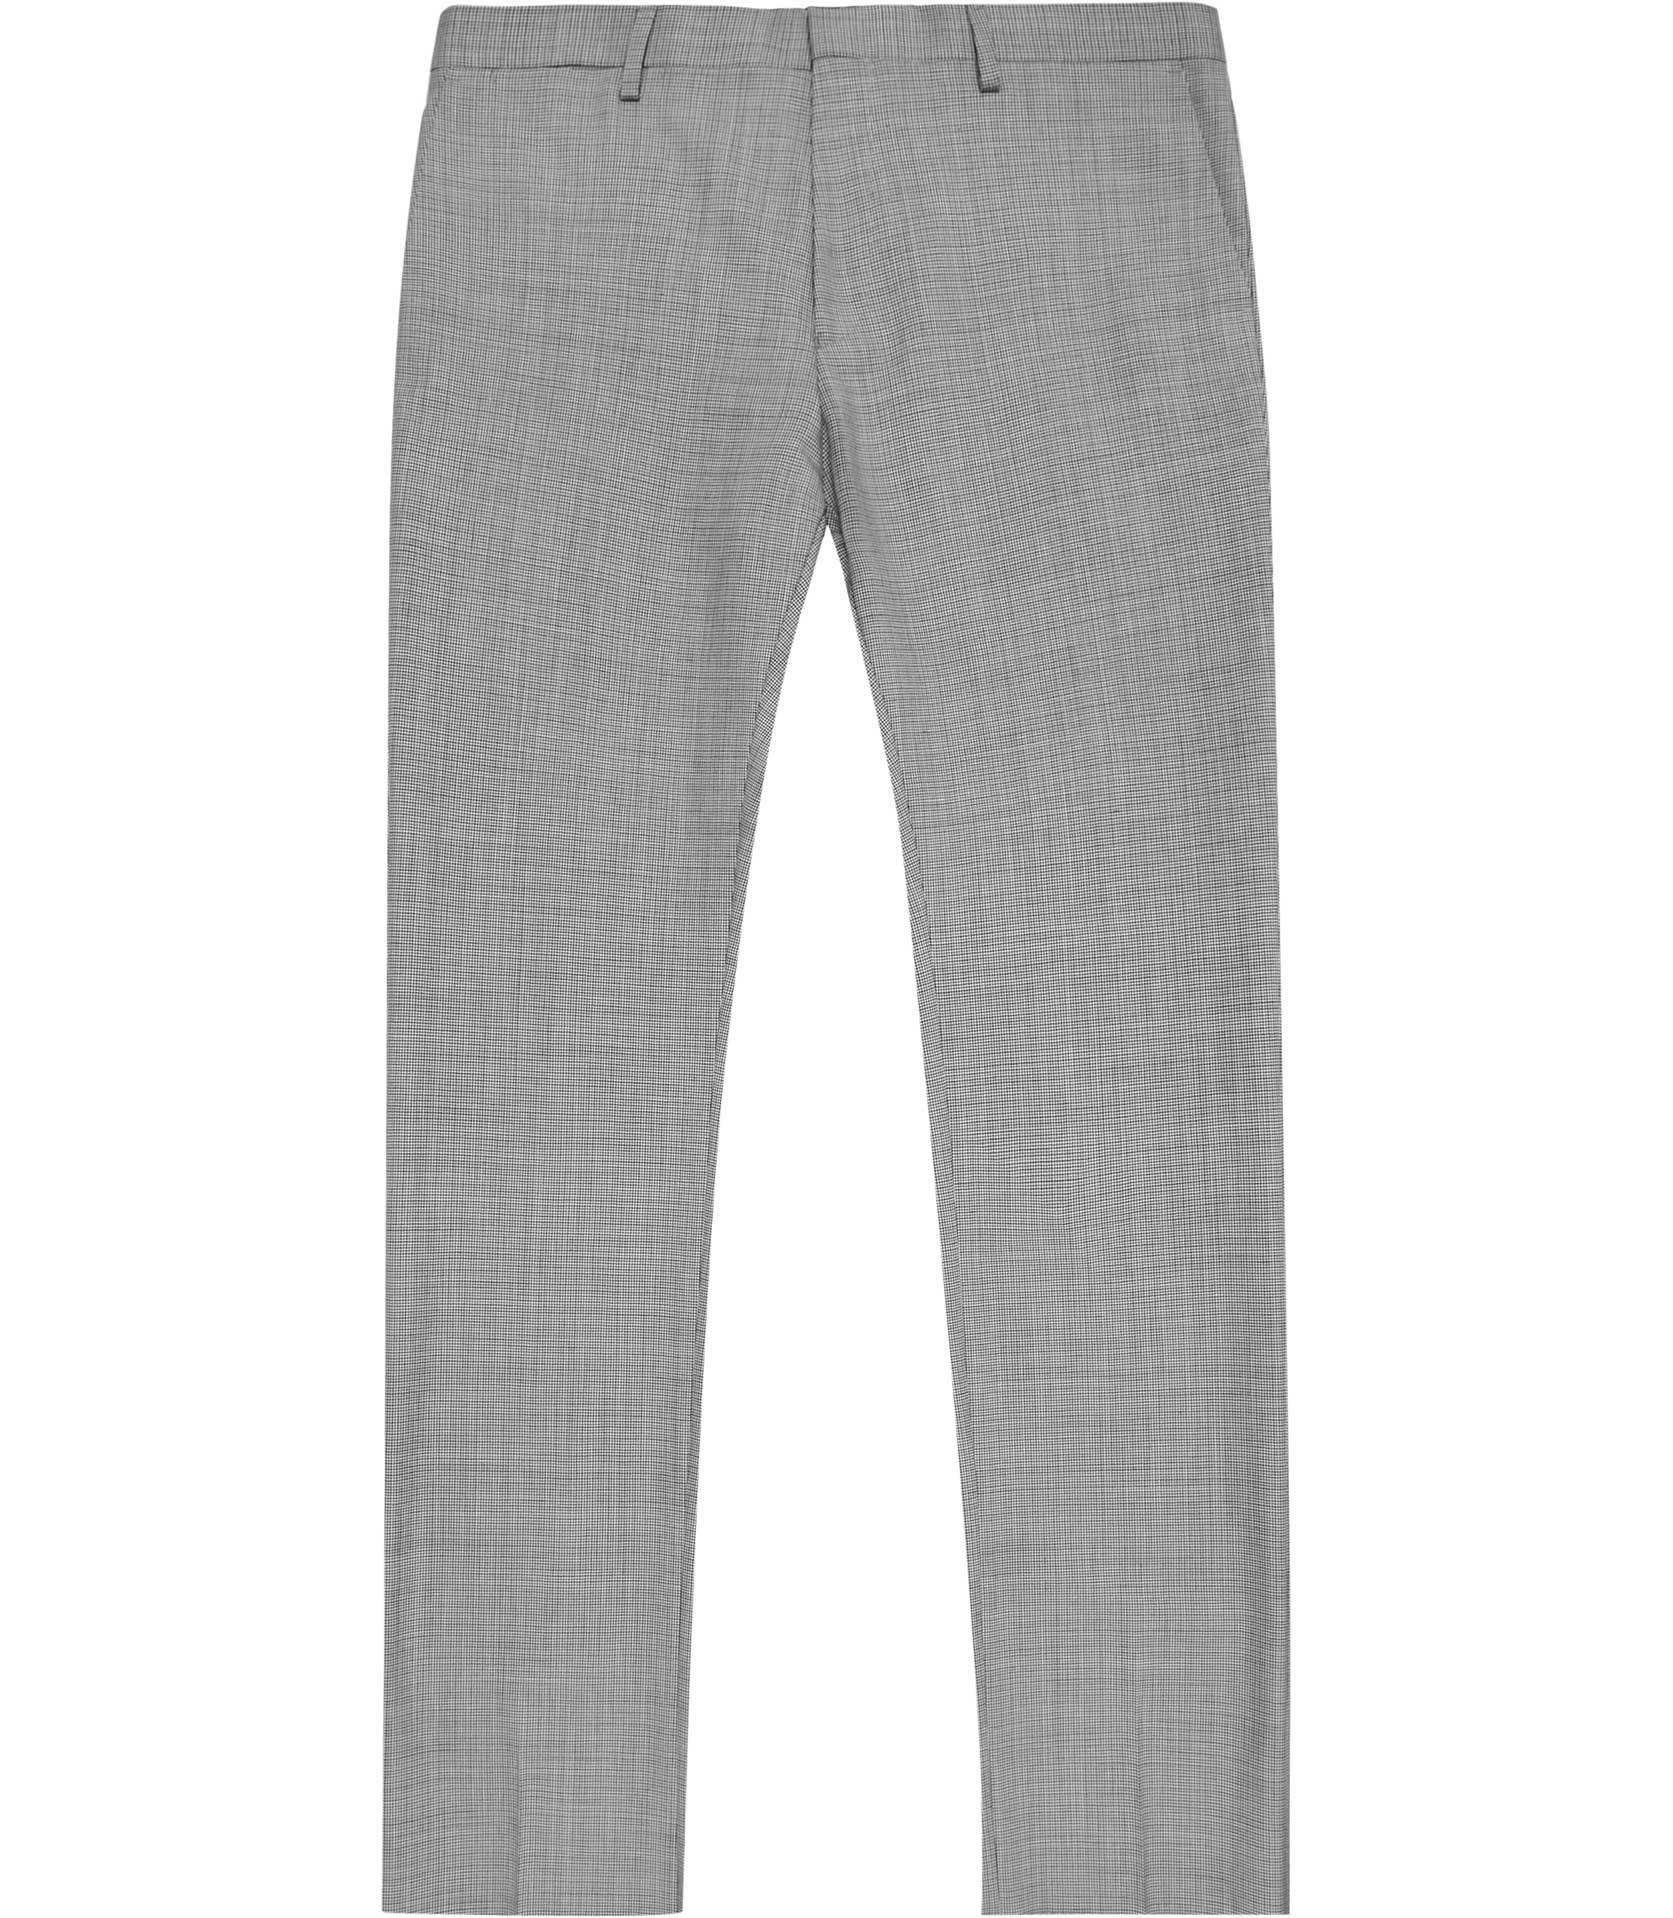 Lyst - Reiss Somerset T Micro Houndstooth Trousers in Gray for Men